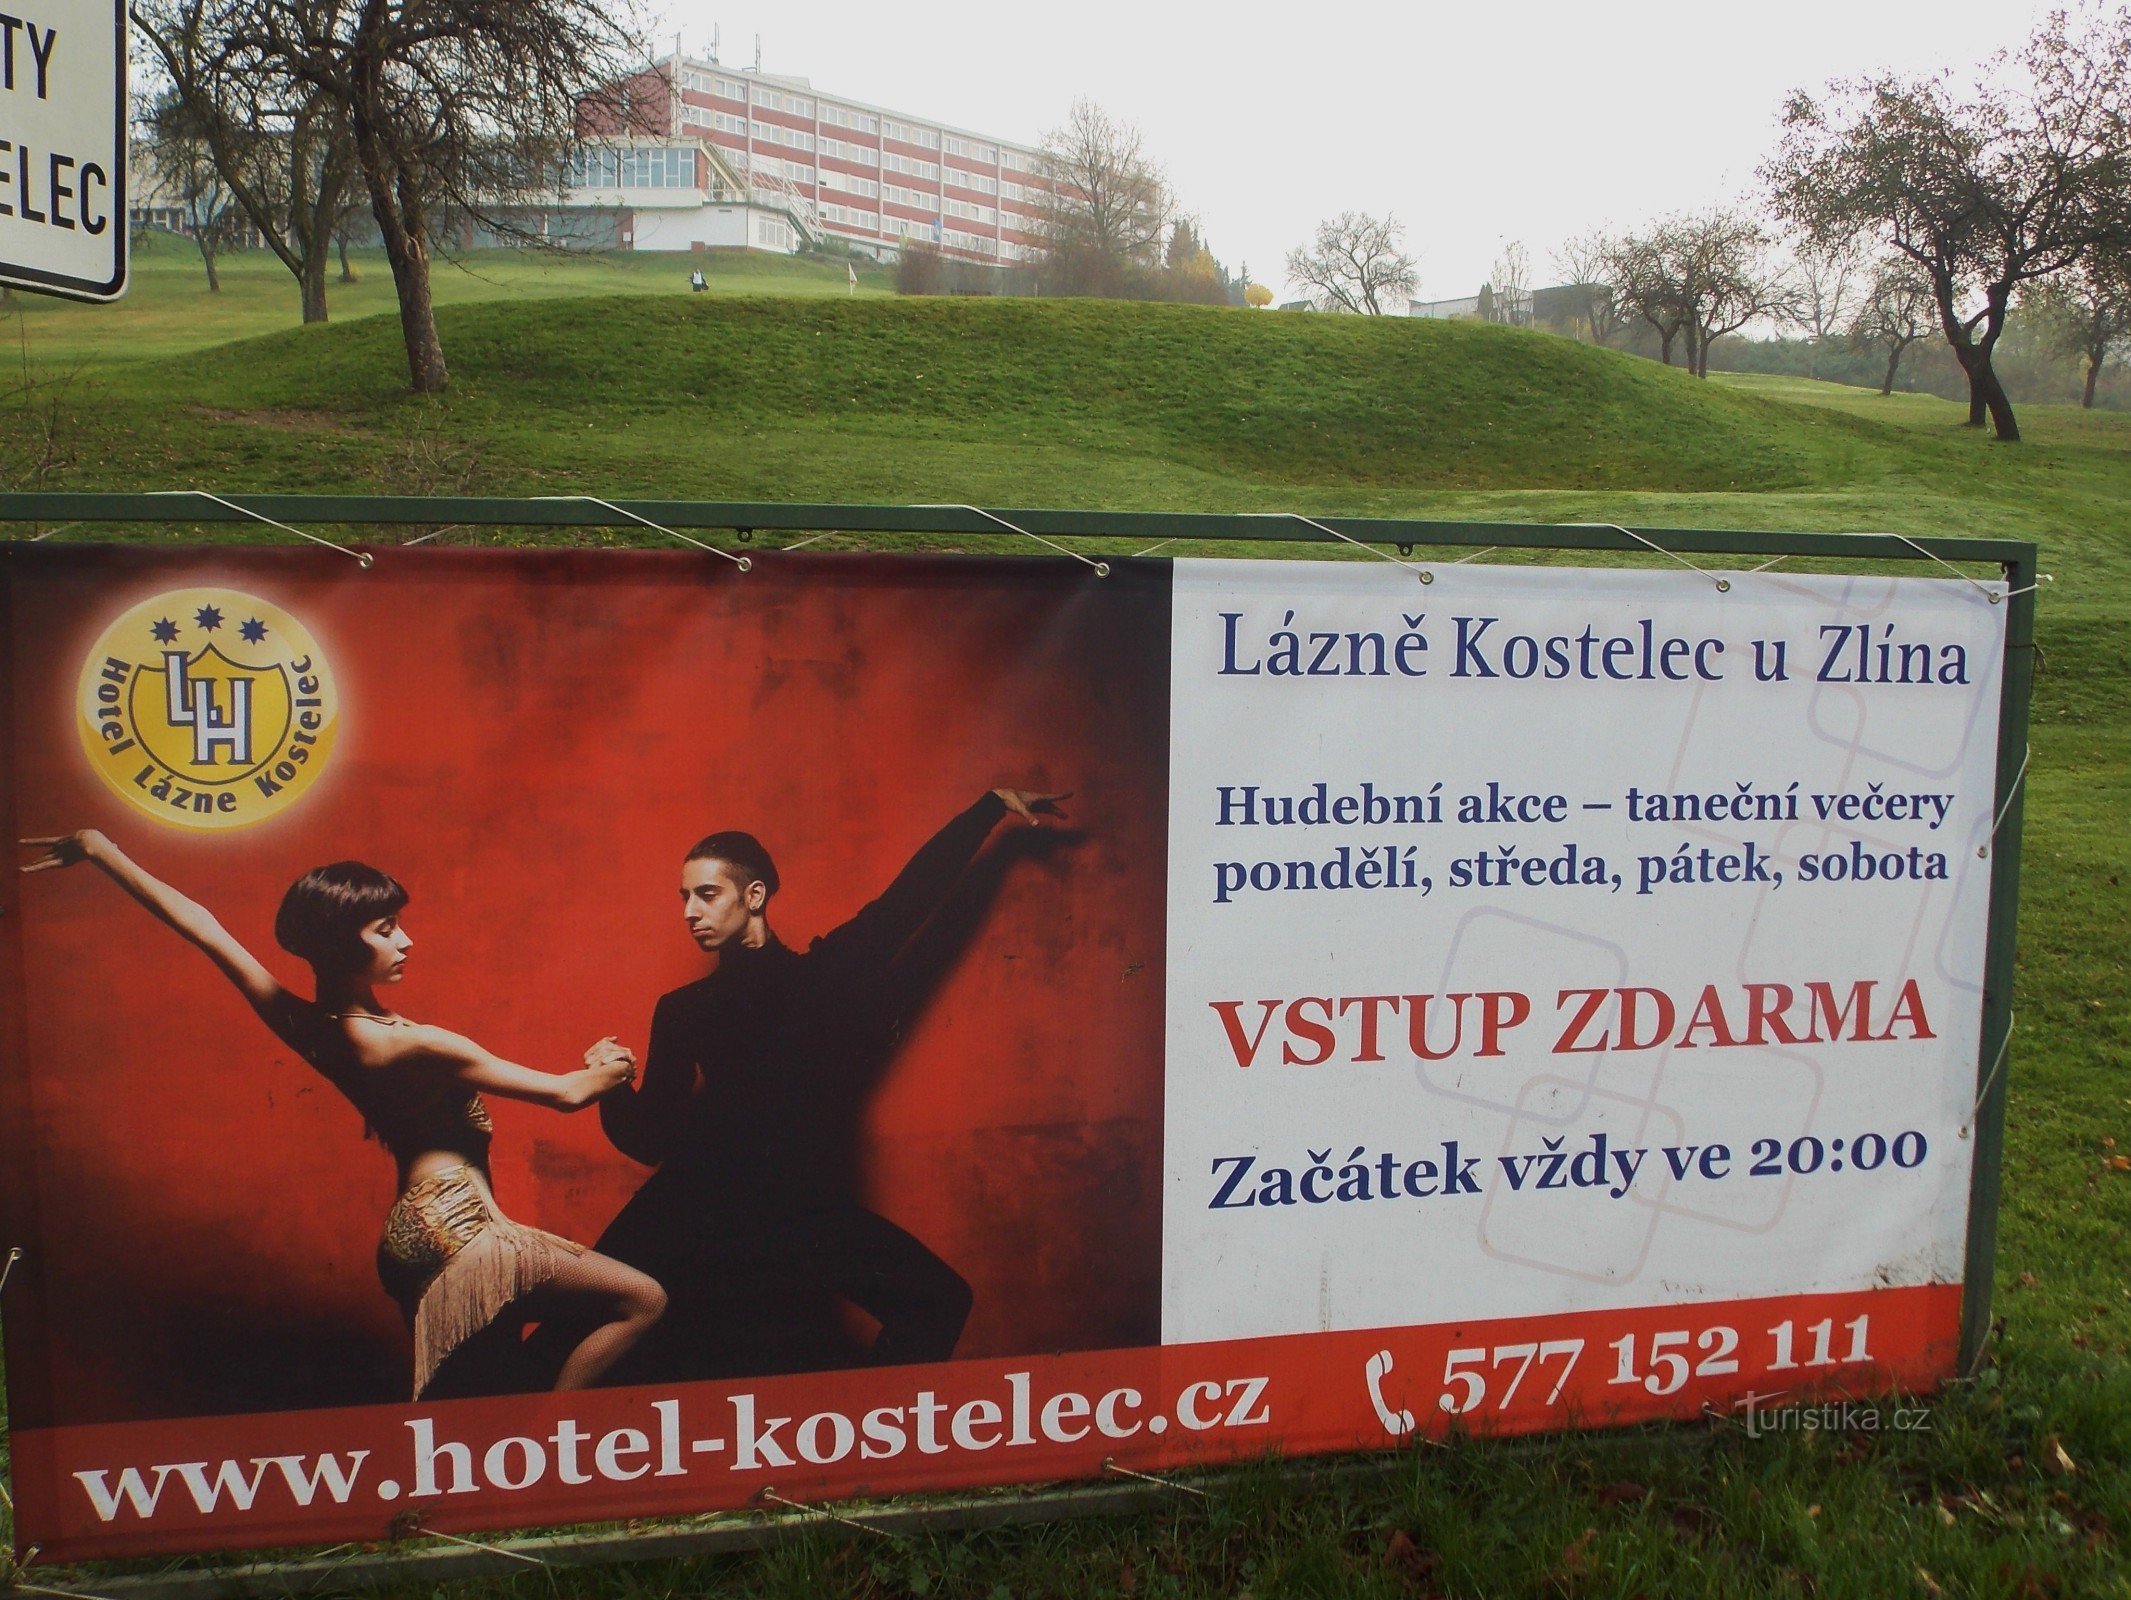 For health and relaxation, go to the Koselec spa near Zlín